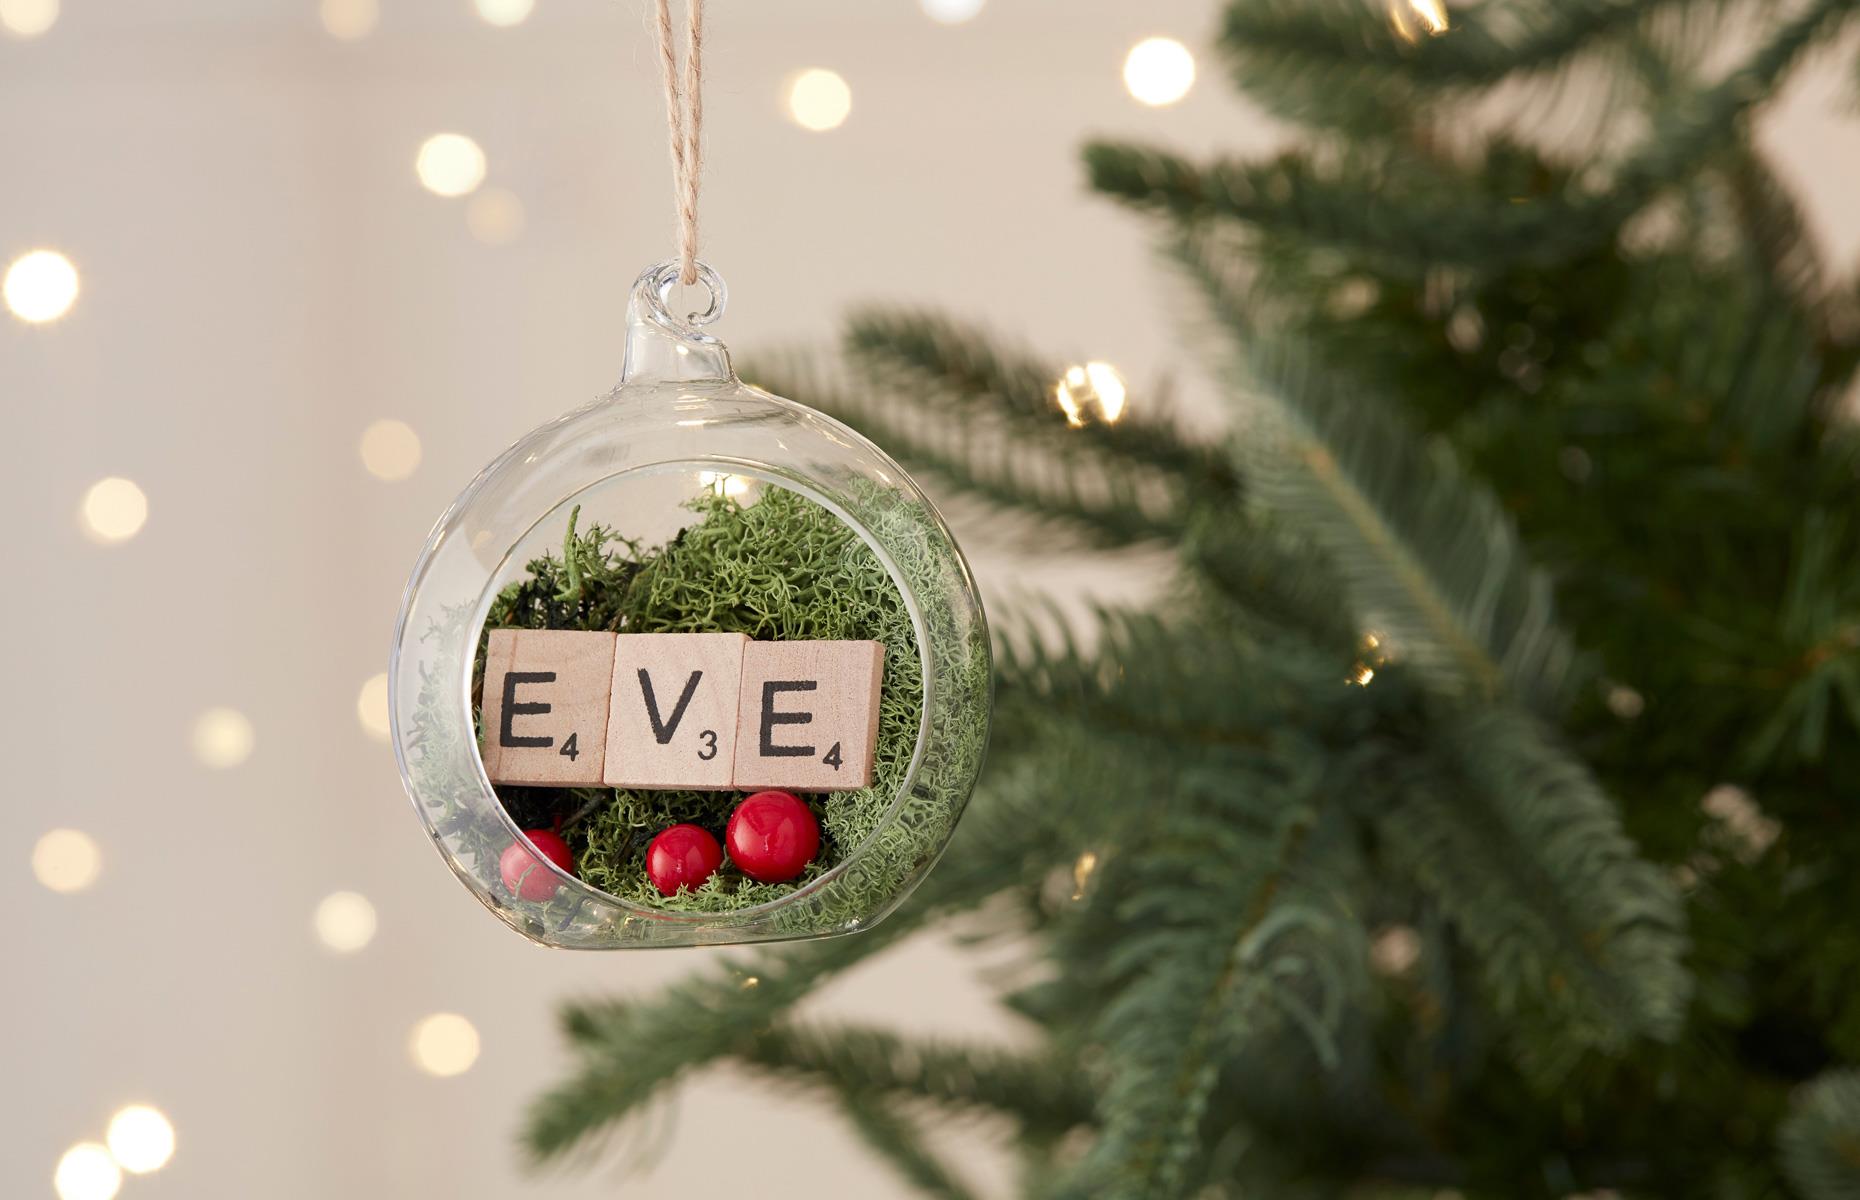 Get creative with Christmas tree ornaments